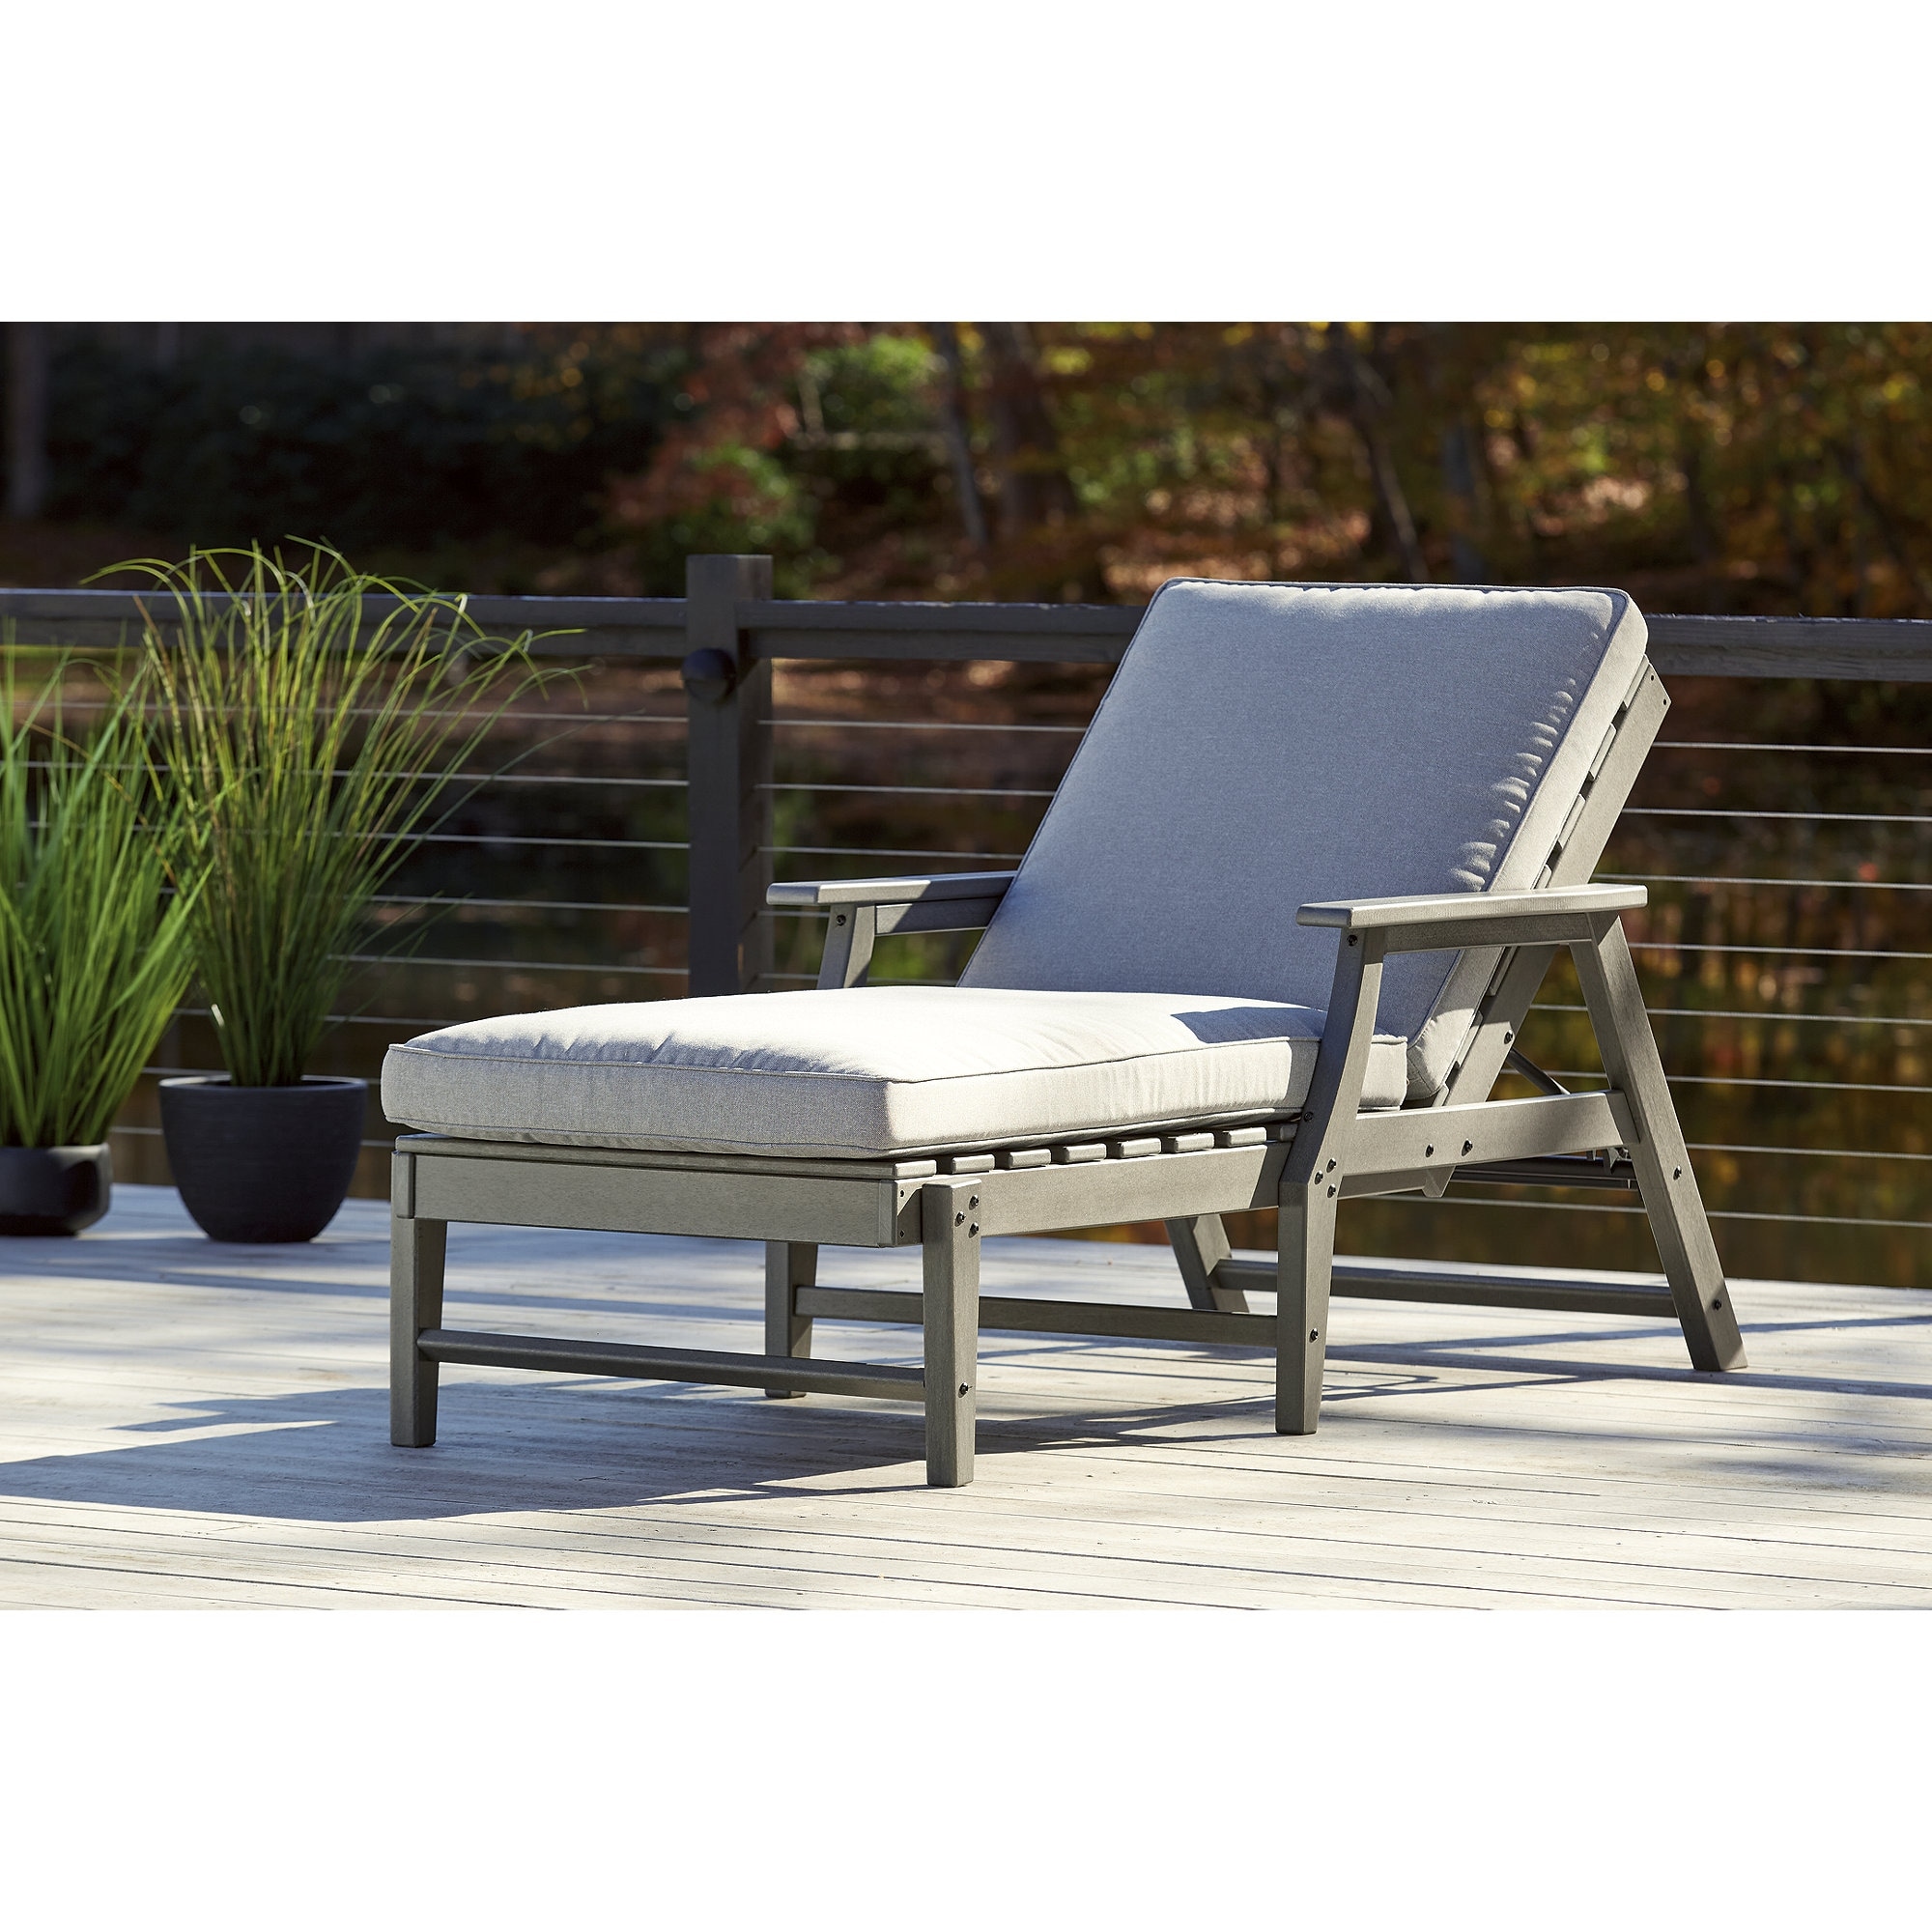 Signature Design By Ashley Visola Outdoor Poly All Weather Chaise Lounge With Cushion - 78w X 33d X 25h